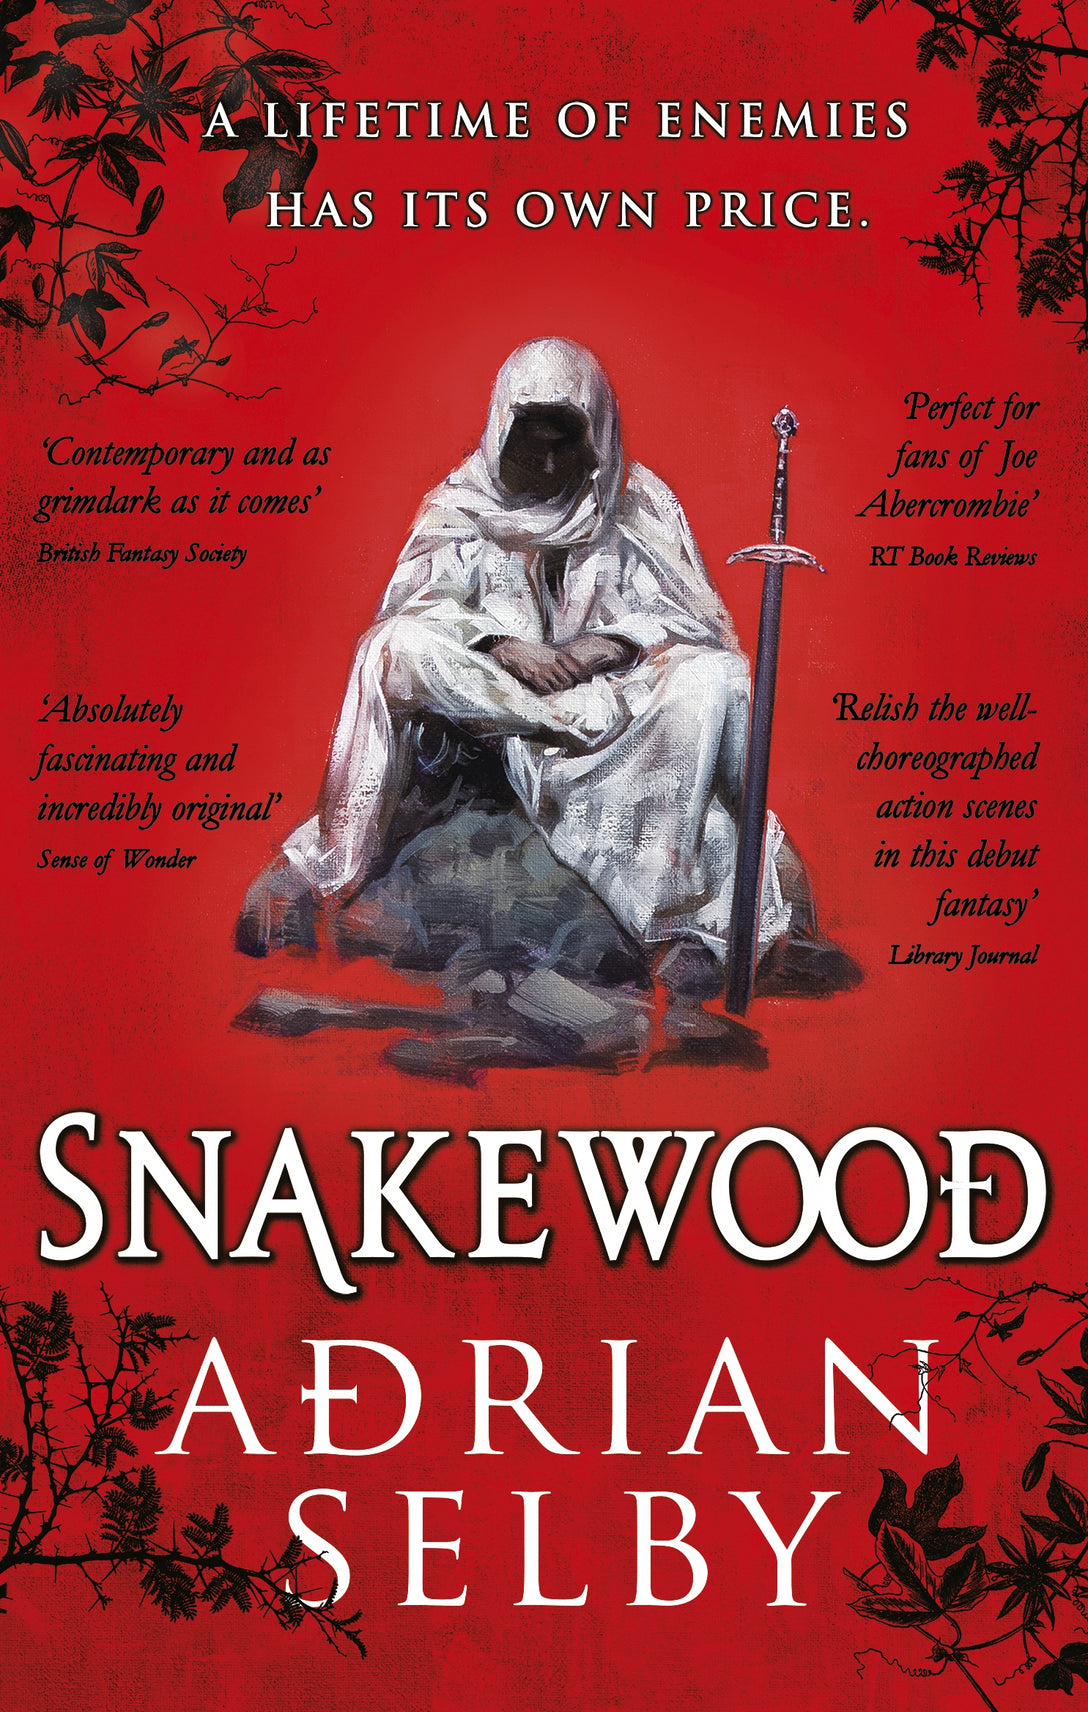 Snakewood by Adrian Selby